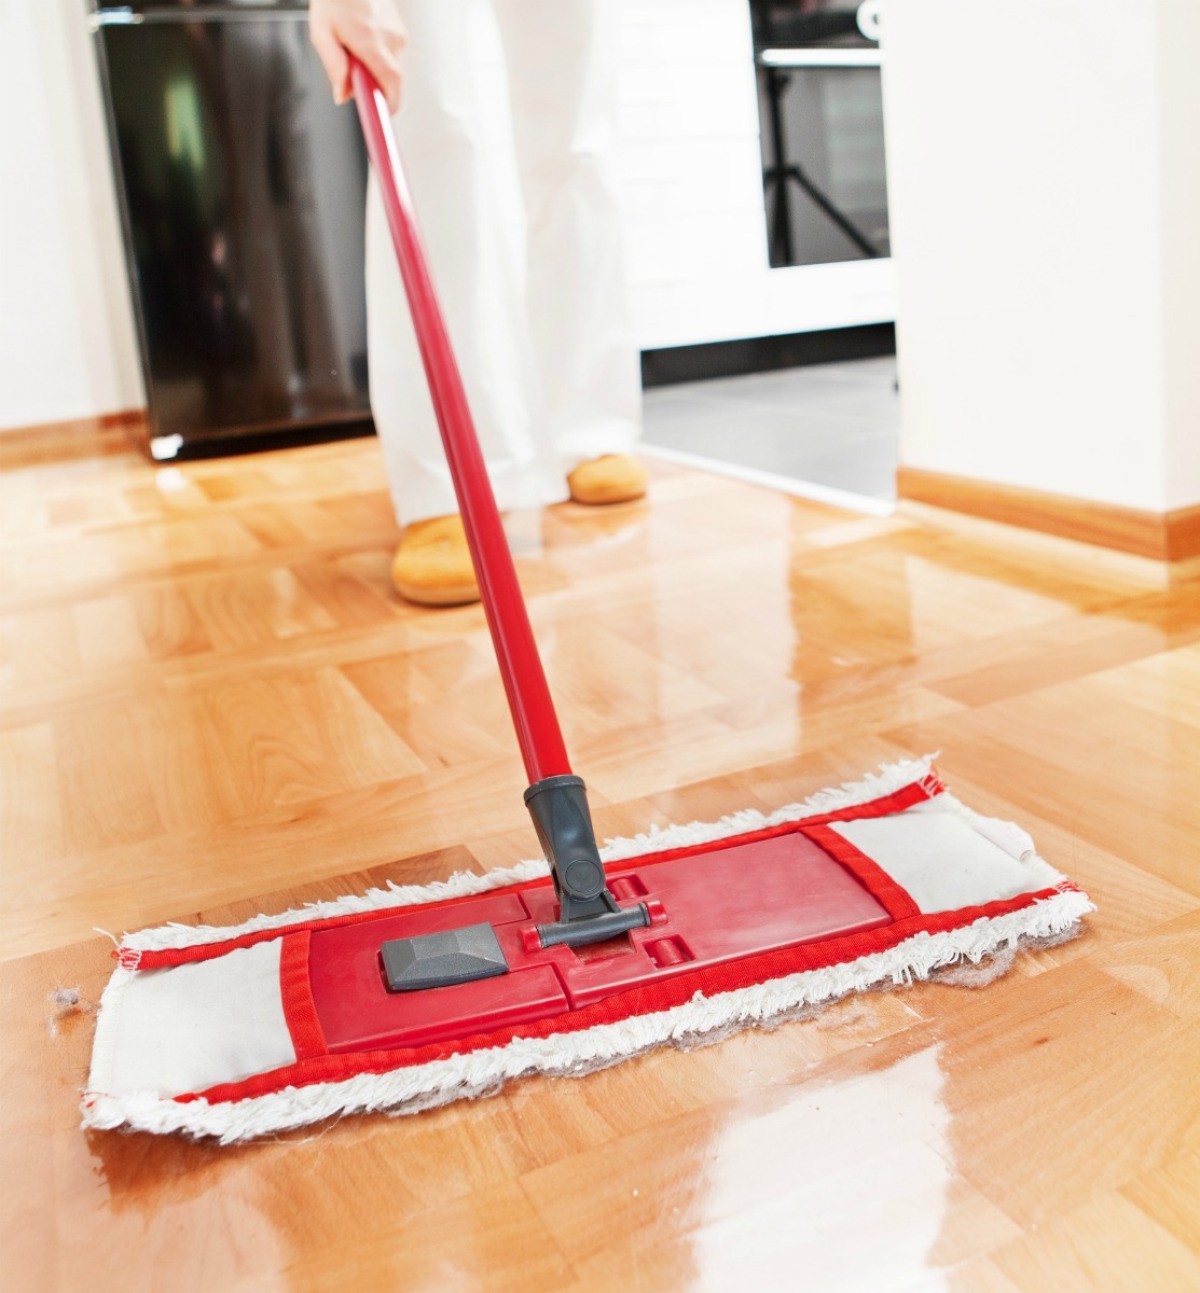 Removing Mop And Glo From Flooring, Can Mop And Glo Be Used On Laminate Floors